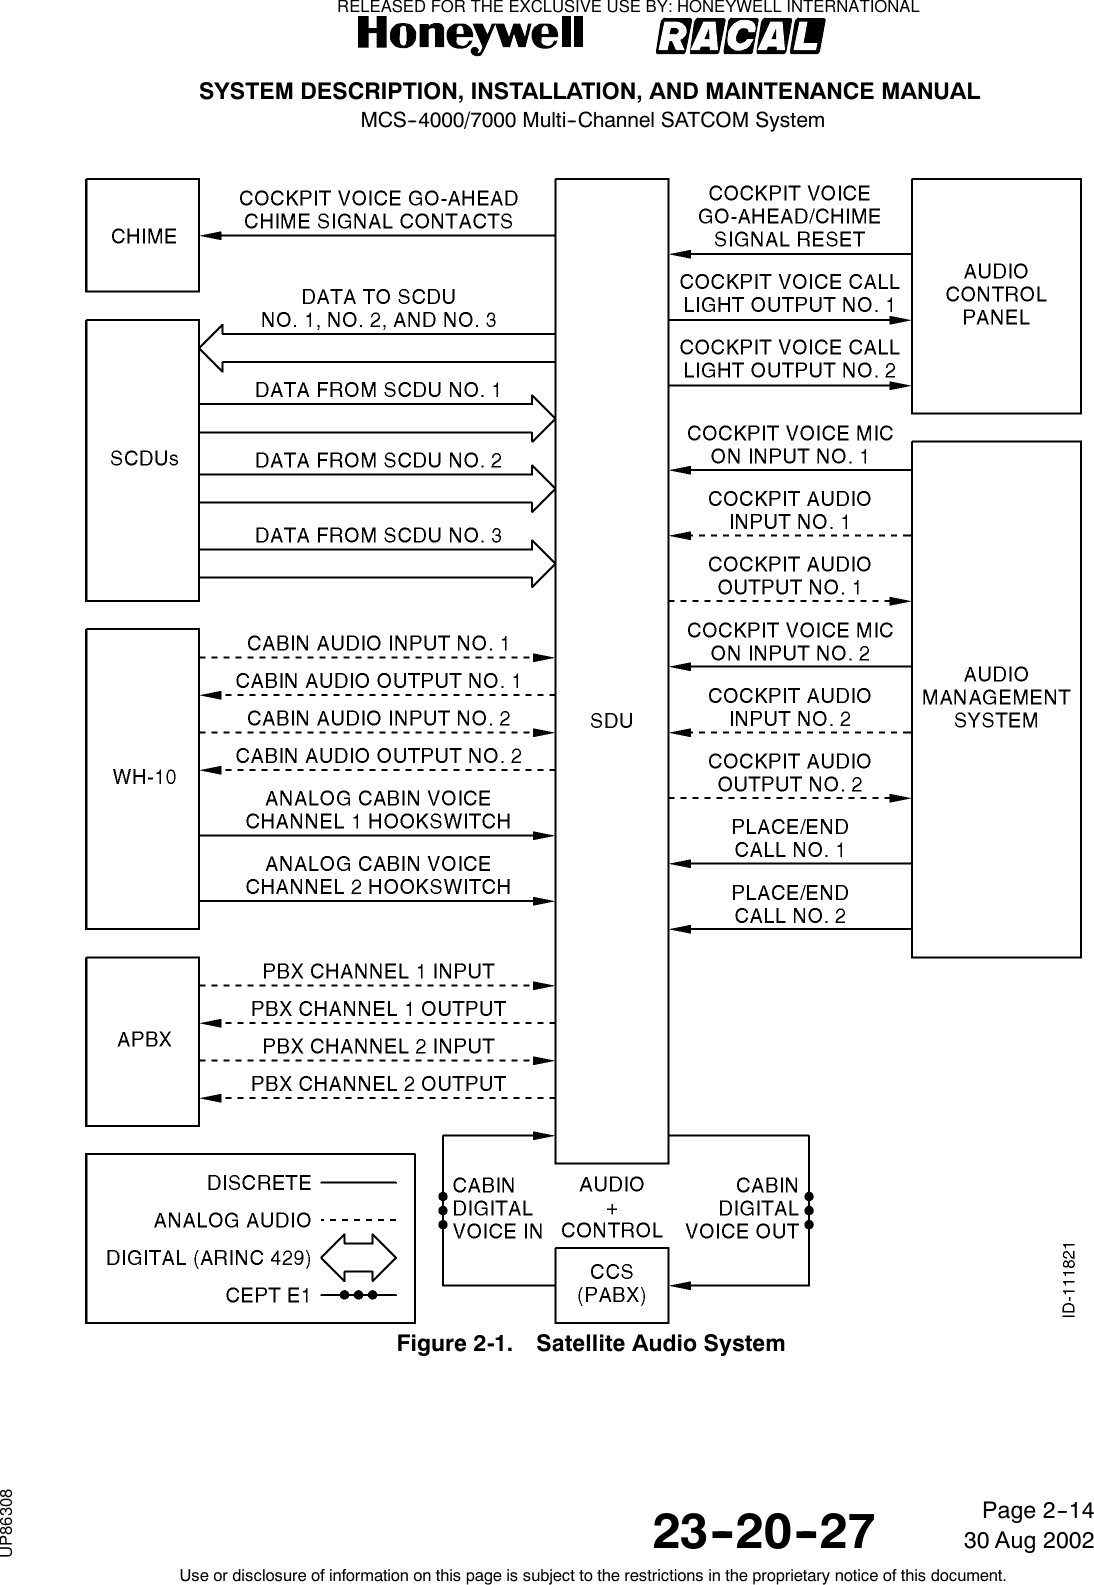 SYSTEM DESCRIPTION, INSTALLATION, AND MAINTENANCE MANUALMCS--4000/7000 Multi--Channel SATCOM System23--20--2730 Aug 2002Use or disclosure of information on this page is subject to the restrictions in the proprietary notice of this document.Page 2--14Figure 2-1. Satellite Audio SystemRELEASED FOR THE EXCLUSIVE USE BY: HONEYWELL INTERNATIONALUP86308